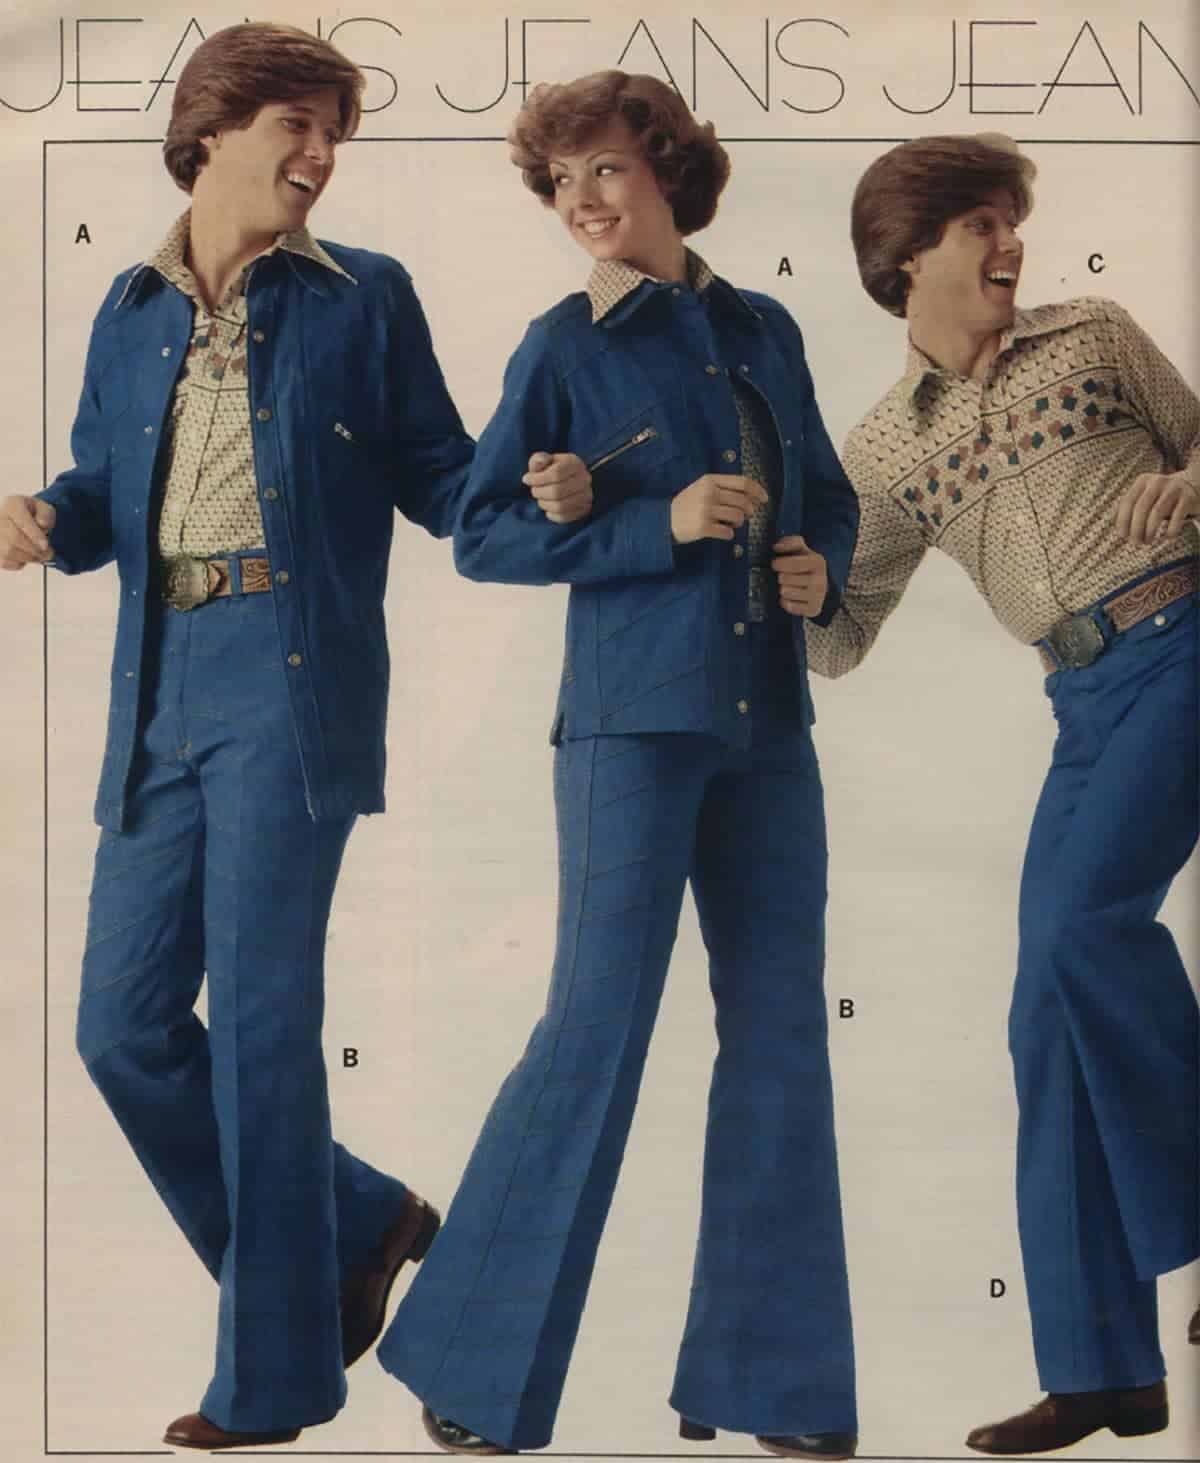 Speigel Catalog 1976 showing men and women in bell bottom leisure suits